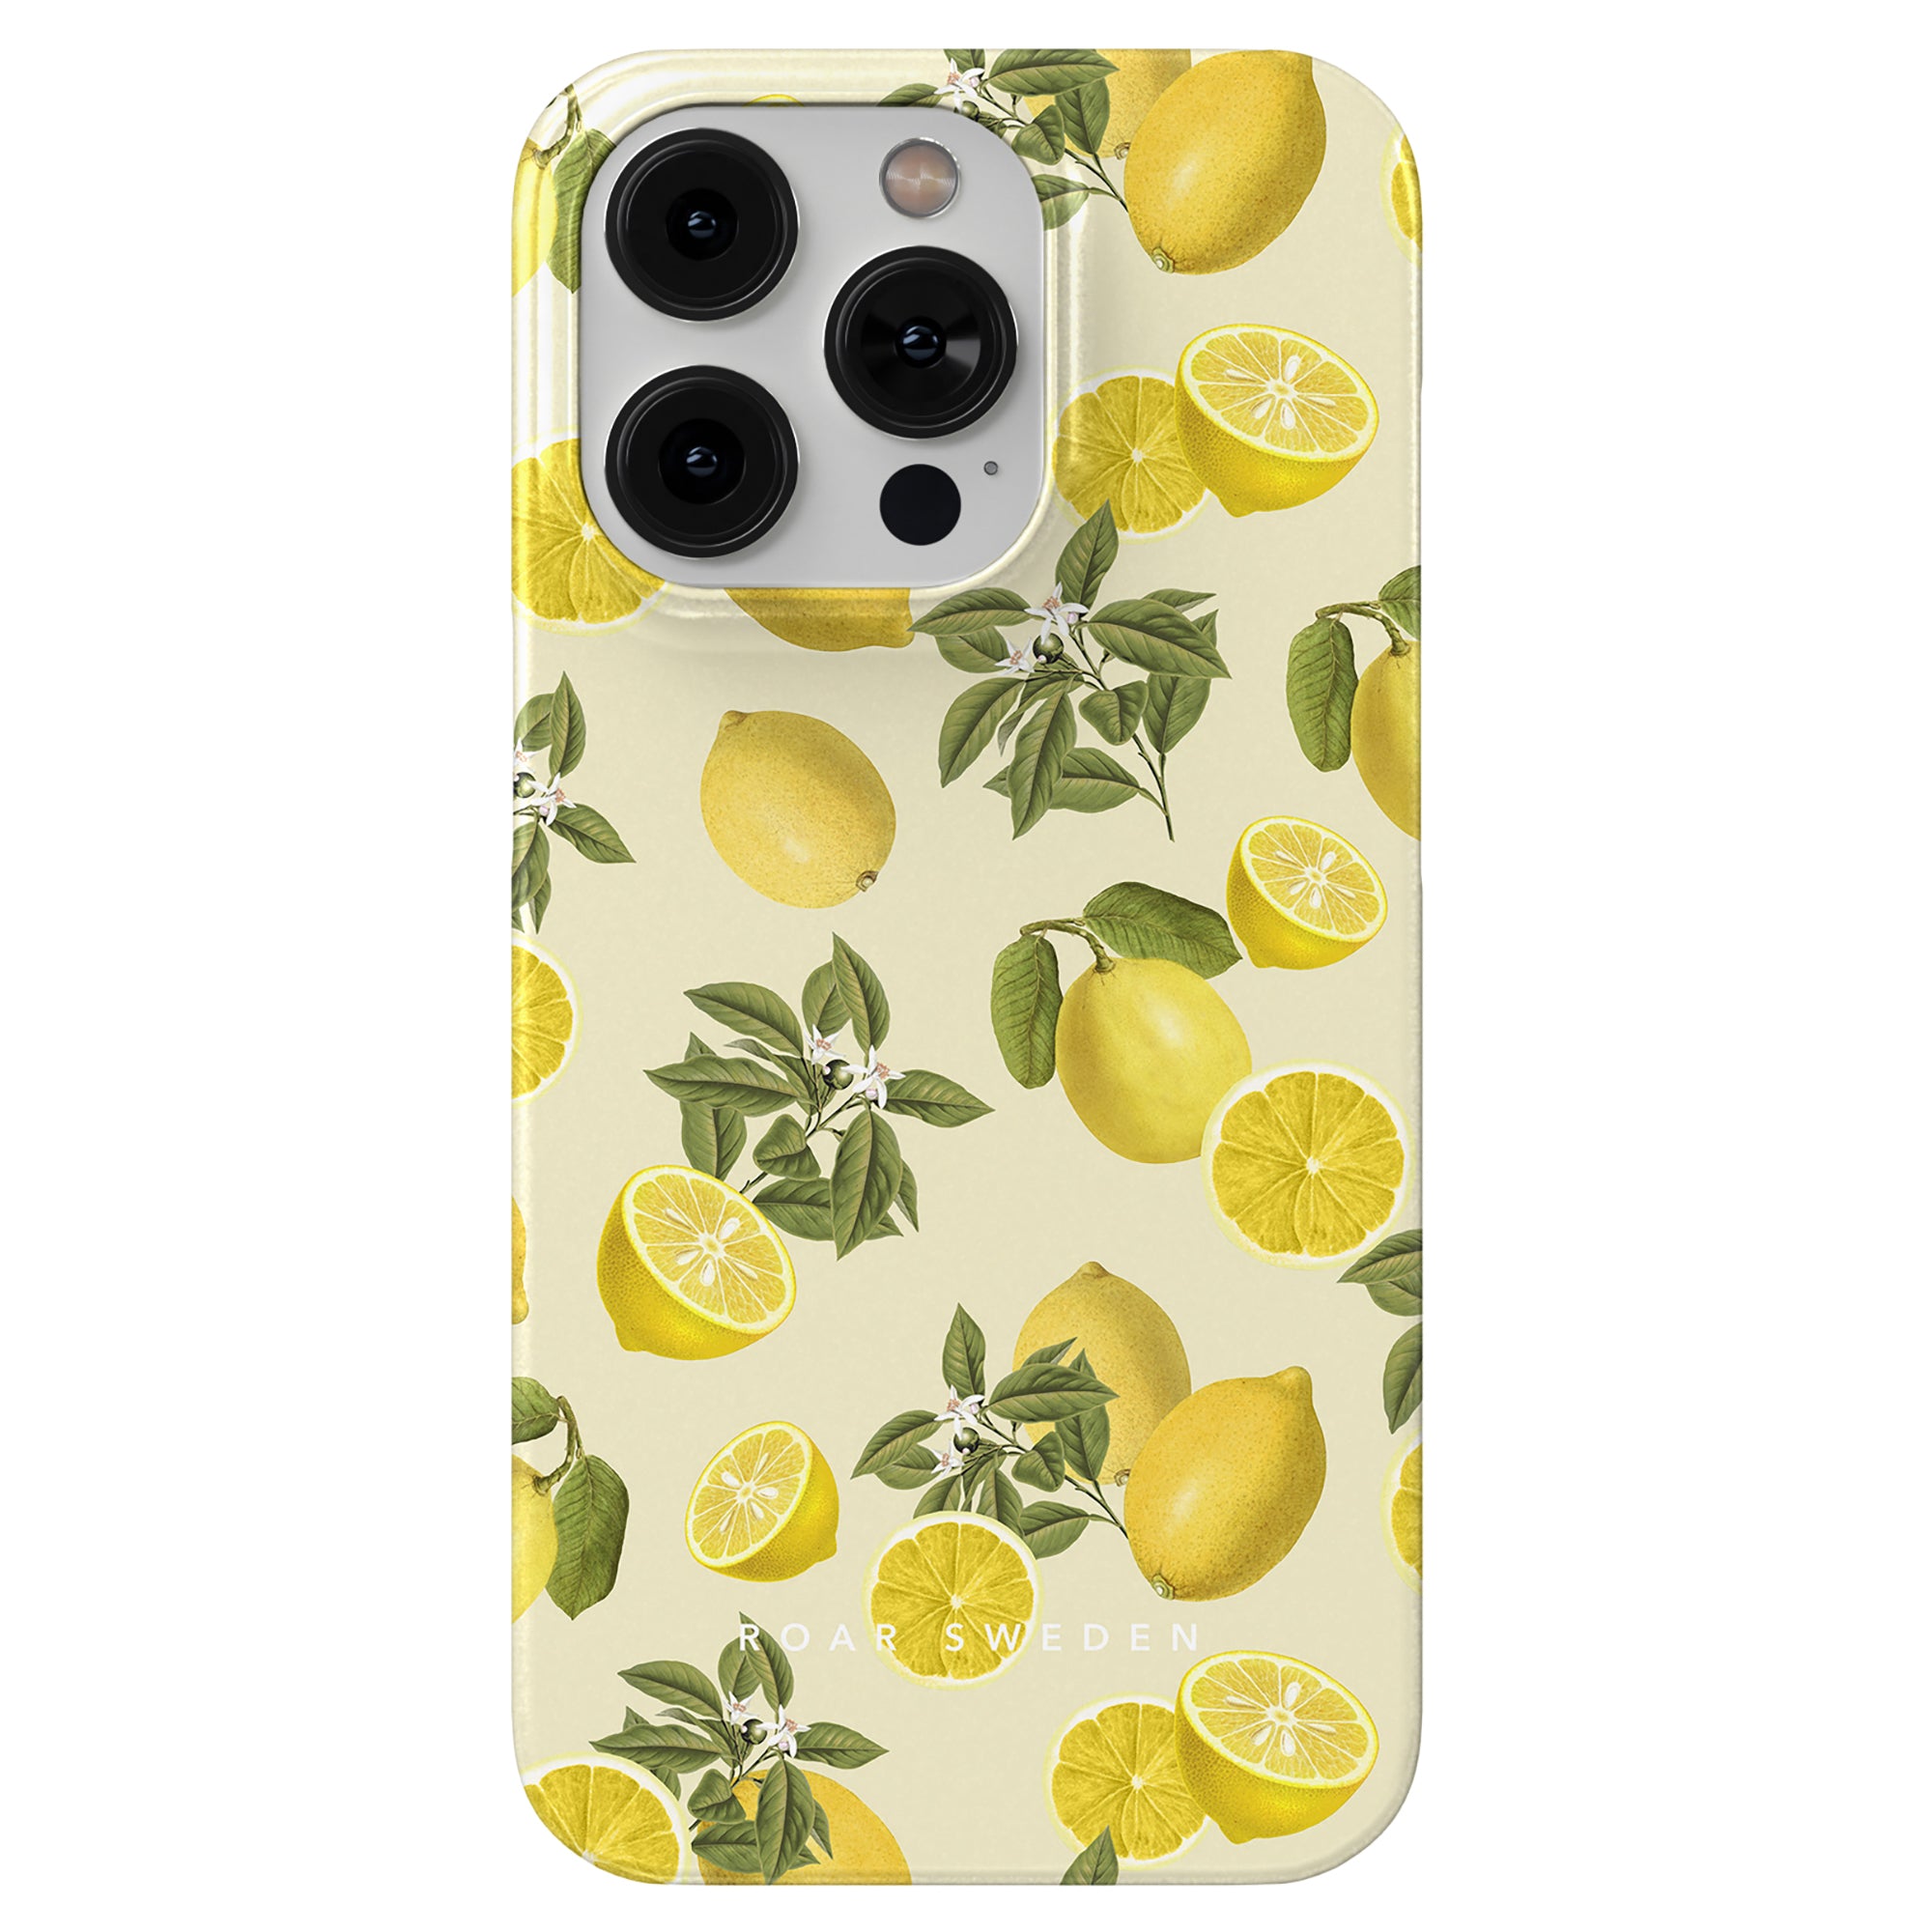 Yellow Limon-patterned phone case with dual camera cutouts, crafted from durable material.